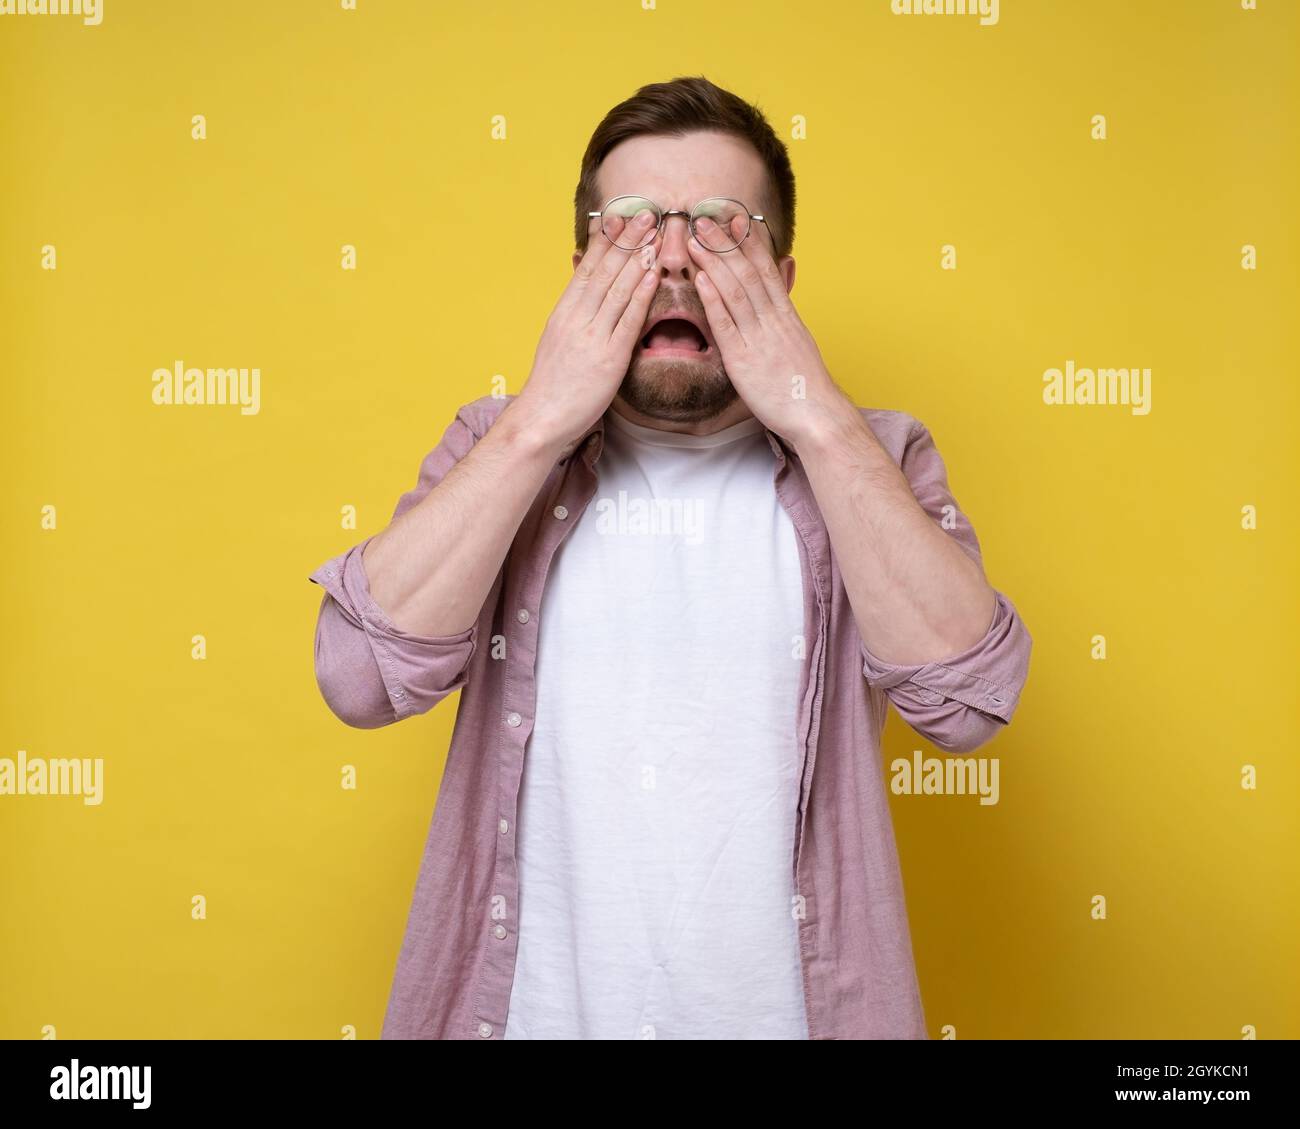 Unhappy Caucasian man is upset and crying, he wipes eyes with hands and opens mouth in sobs. Yellow background. Stock Photo